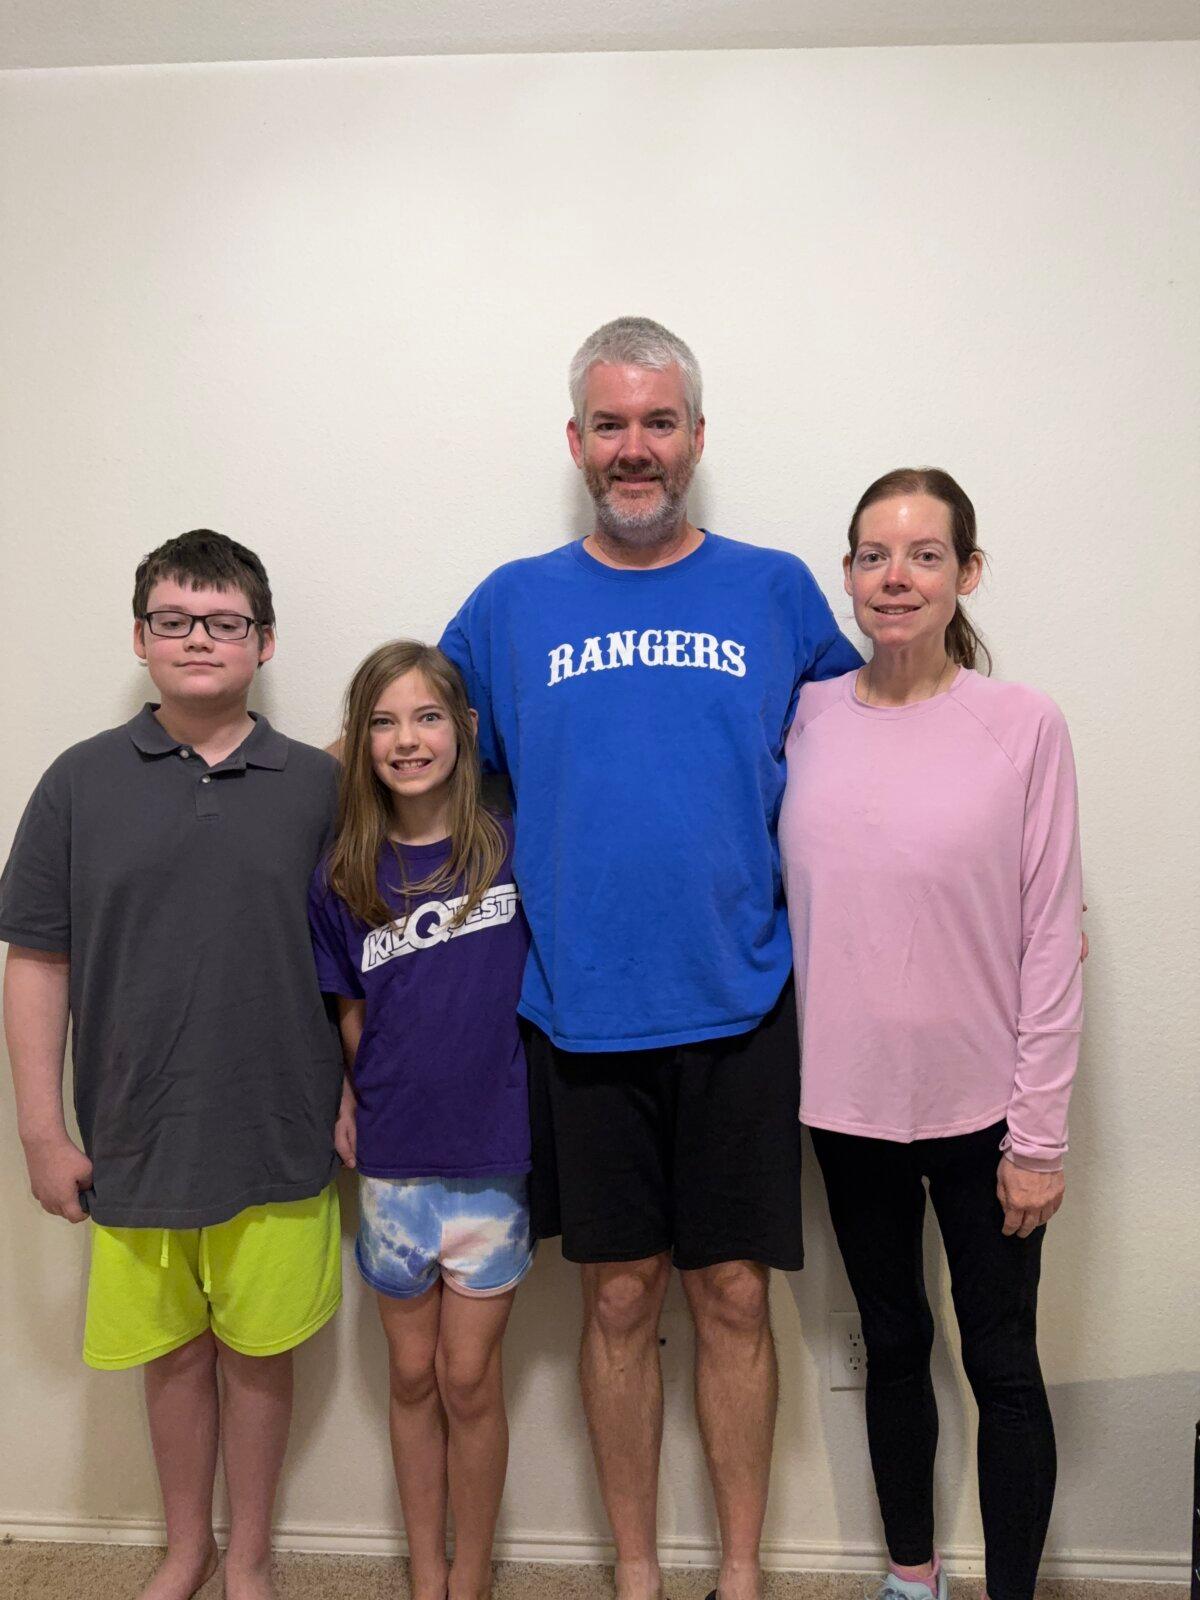 Ms. Ledgerwood with her family after her weight loss journey. (Courtesy of Kristi Ledgerwood)